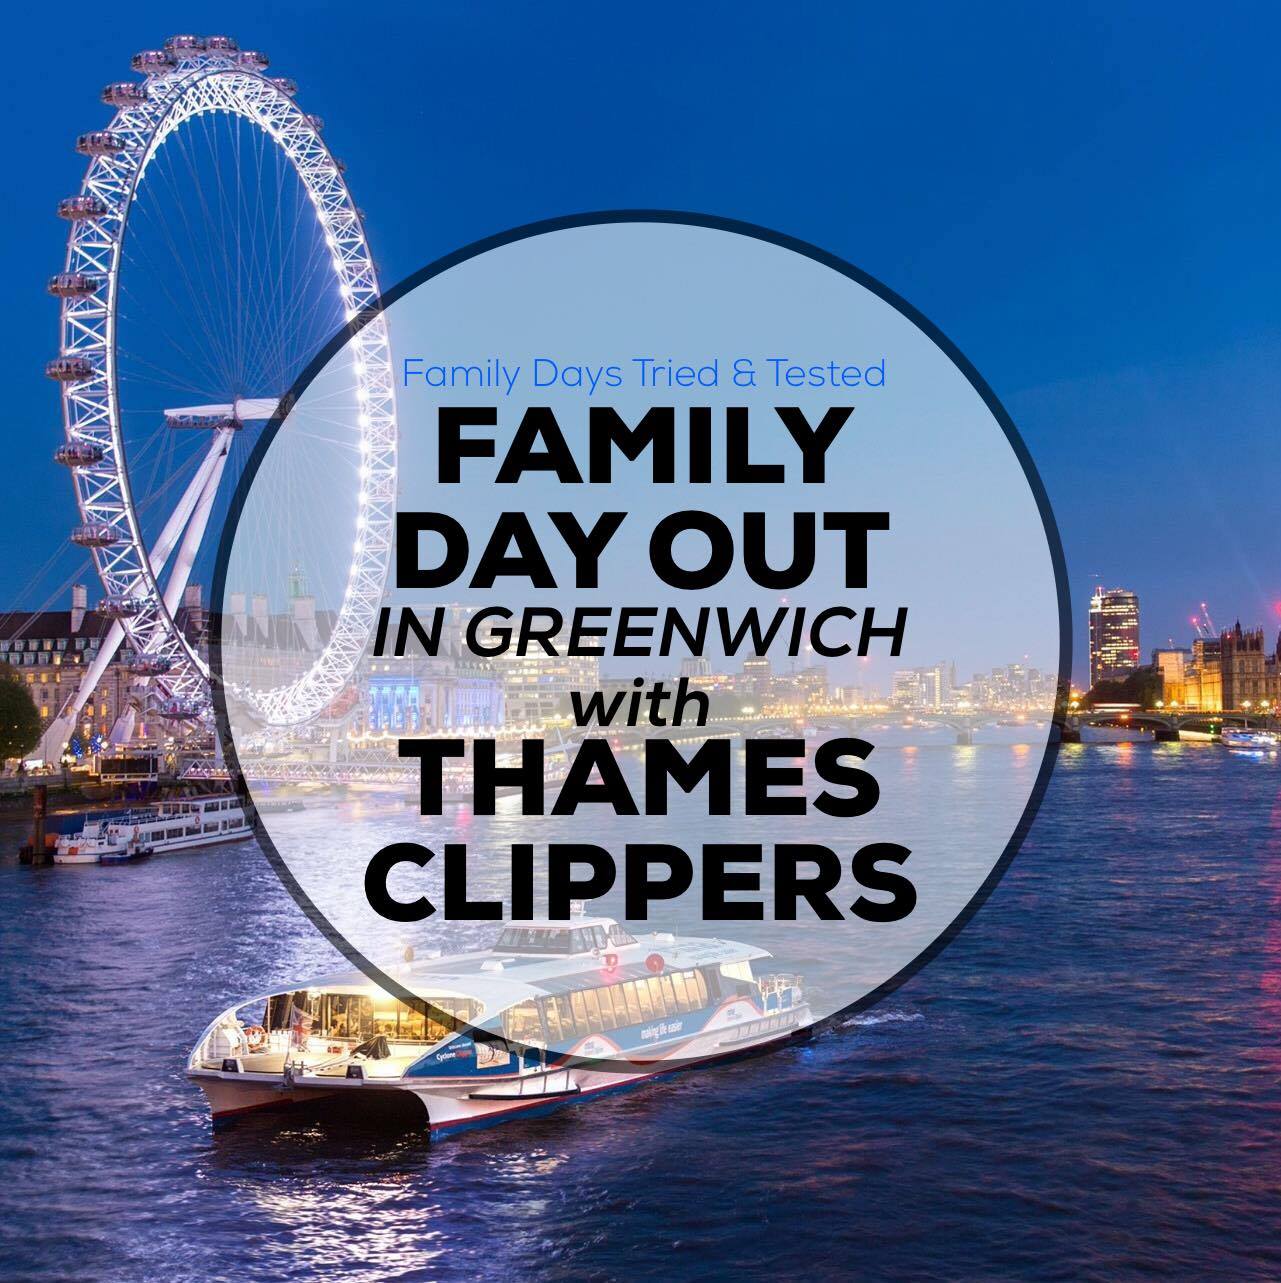 Family Day Out in Greenwich with Thames Clippers